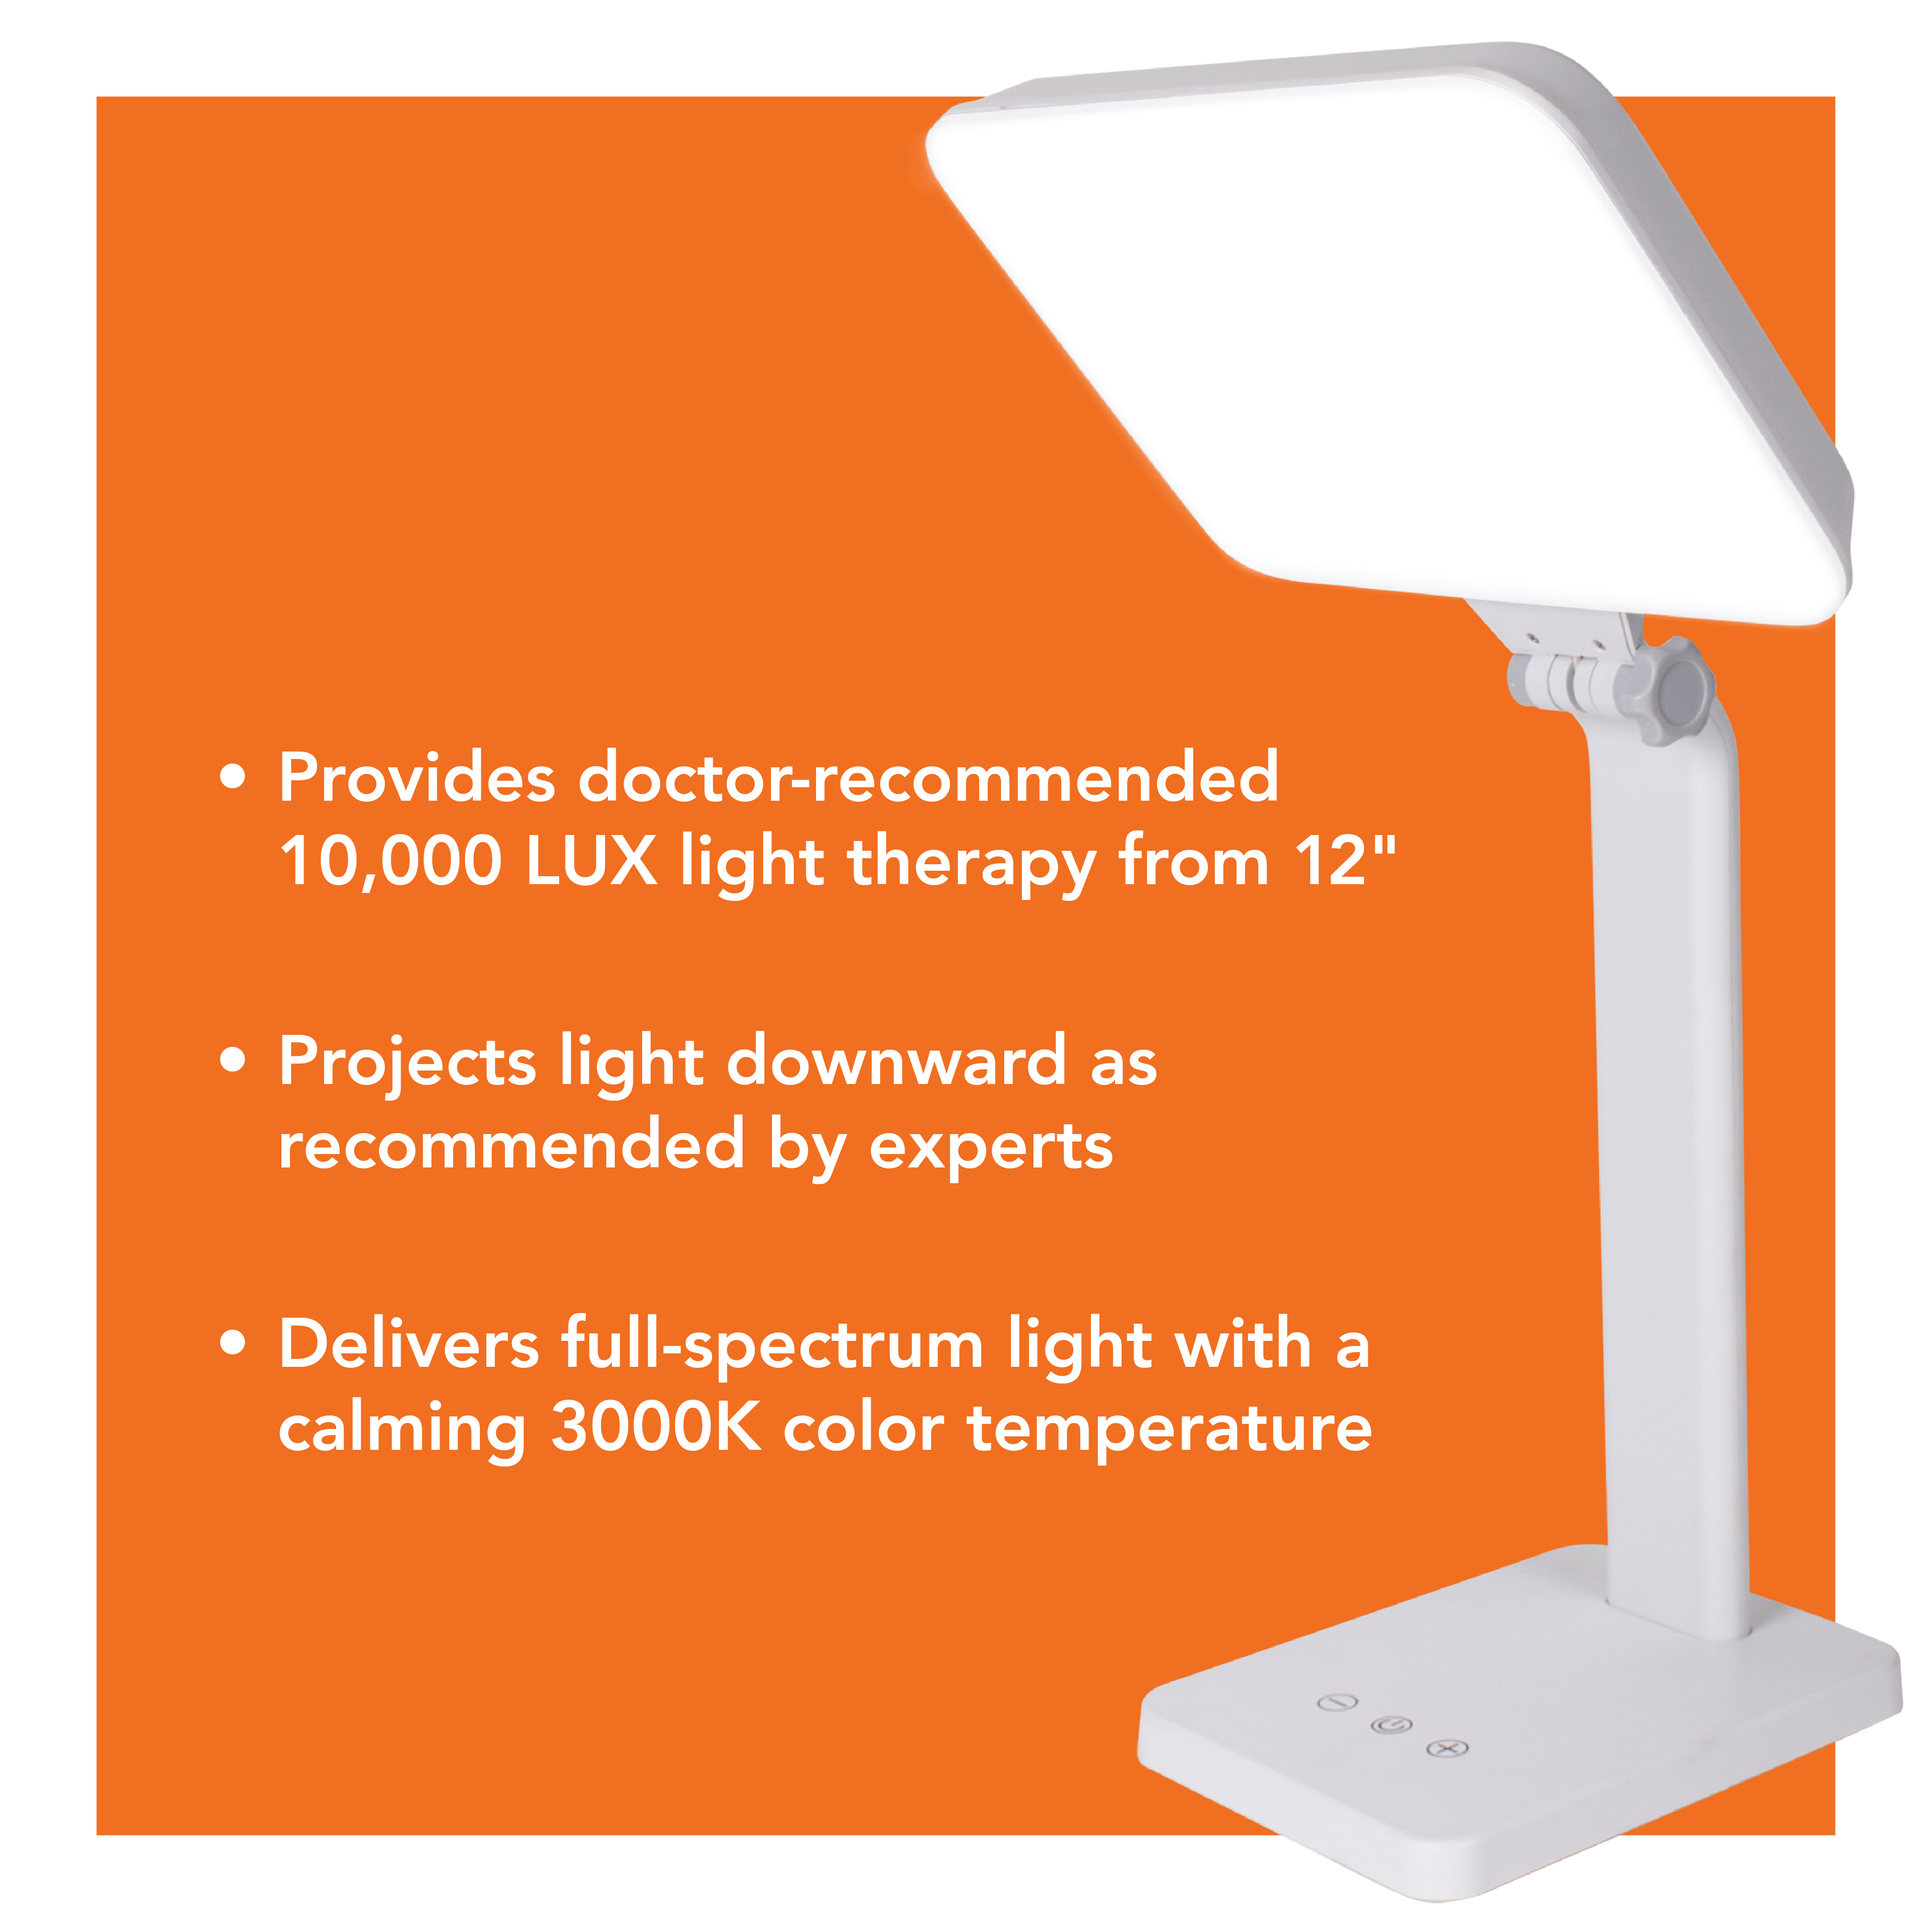 The 2022 Ultimate Guide To Bright Light Therapy Carex